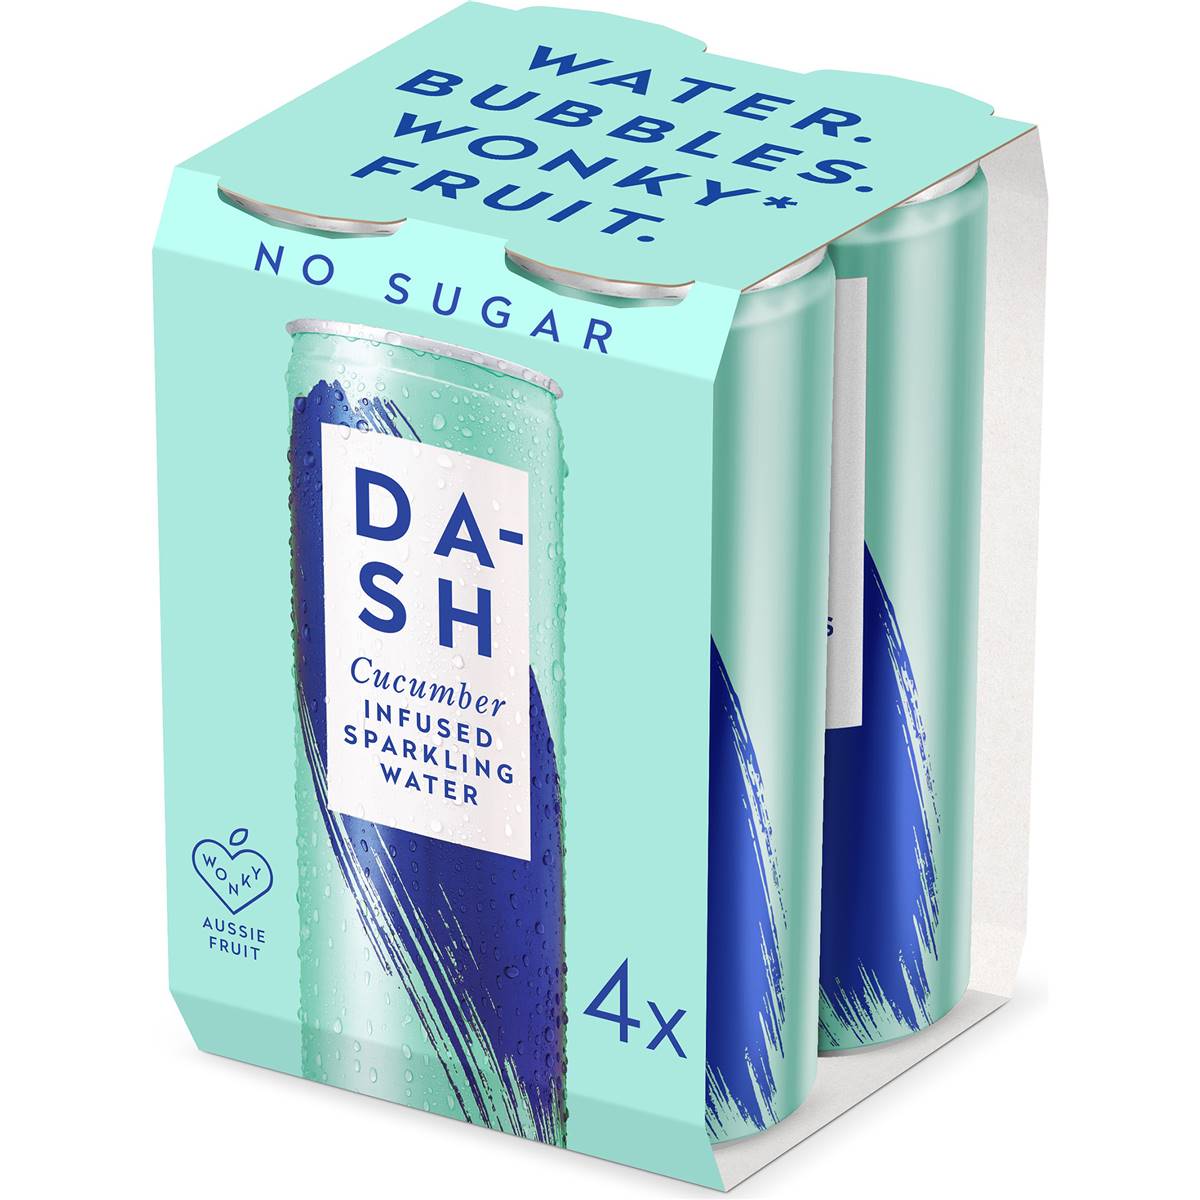 Calories in Dash Water Cucumber Infused Sparkling Water